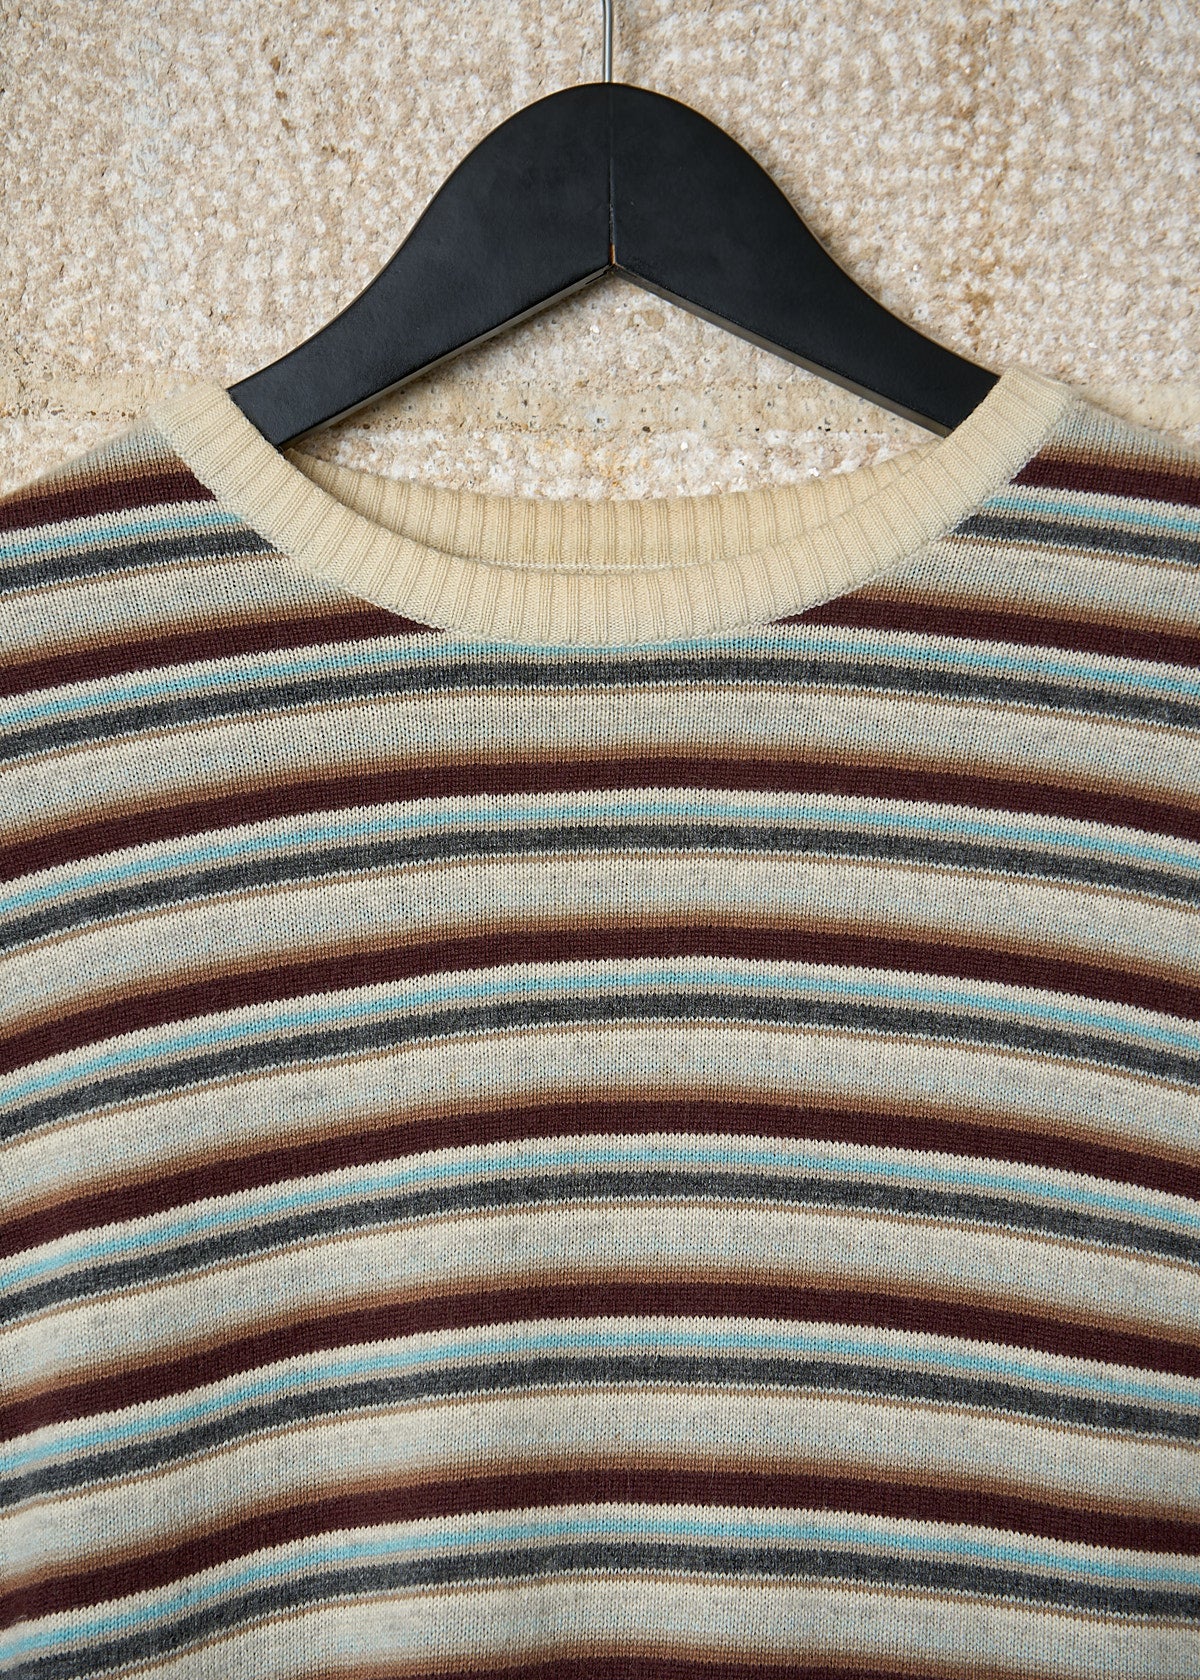 MULTICOLOR CASHMERE WOOL STRIPED CREWNECK JUMPER AW2001 - LARGE